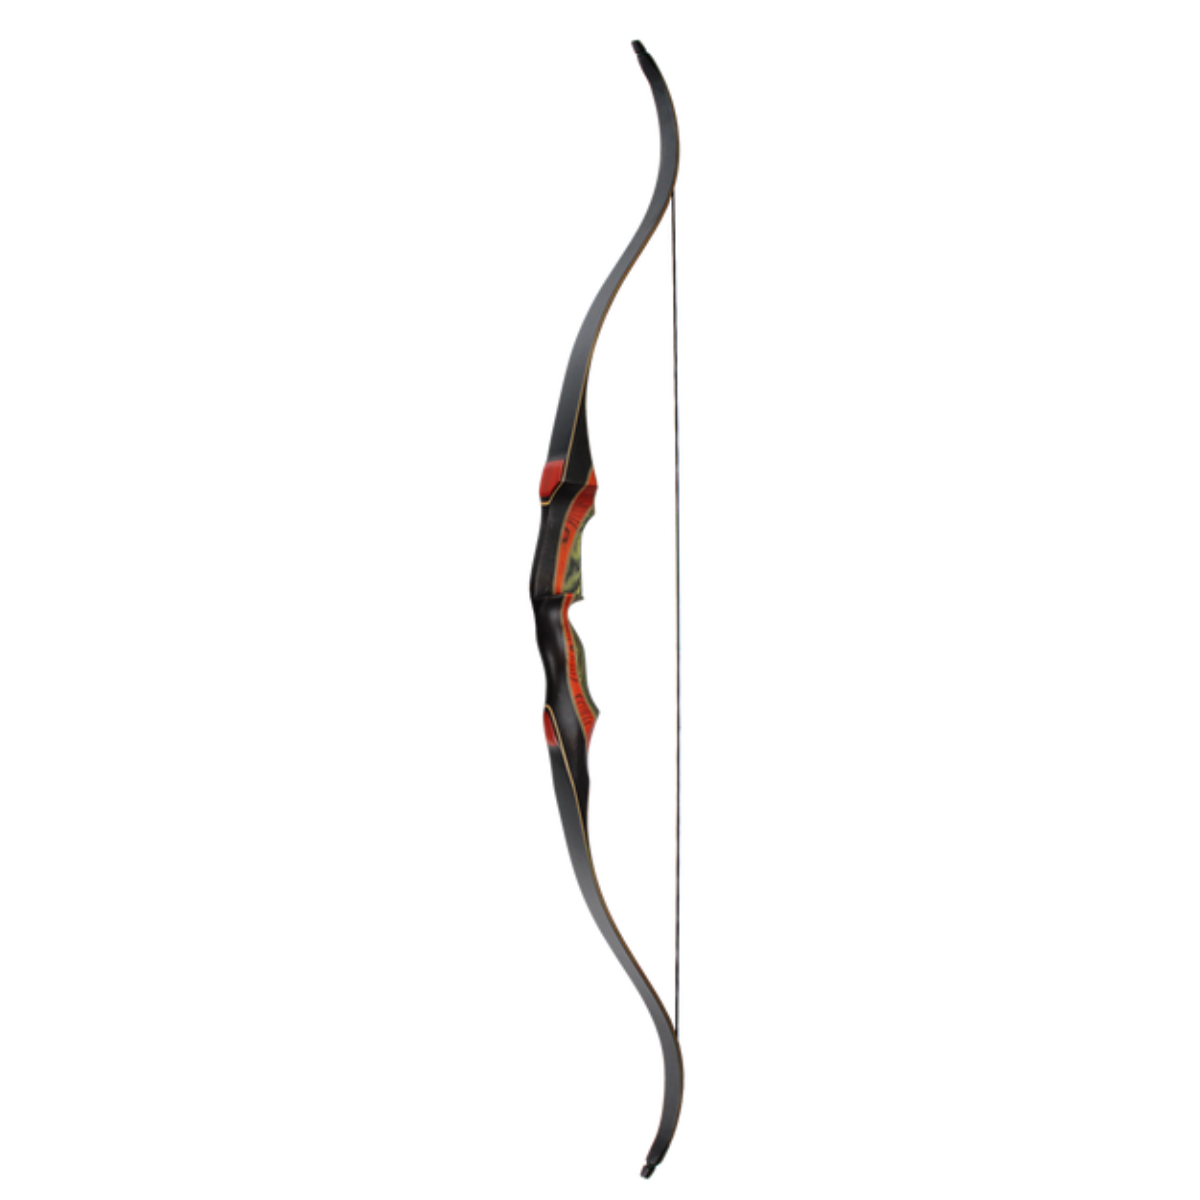 Greatree Caribou Black One-Piece Recurve Bow